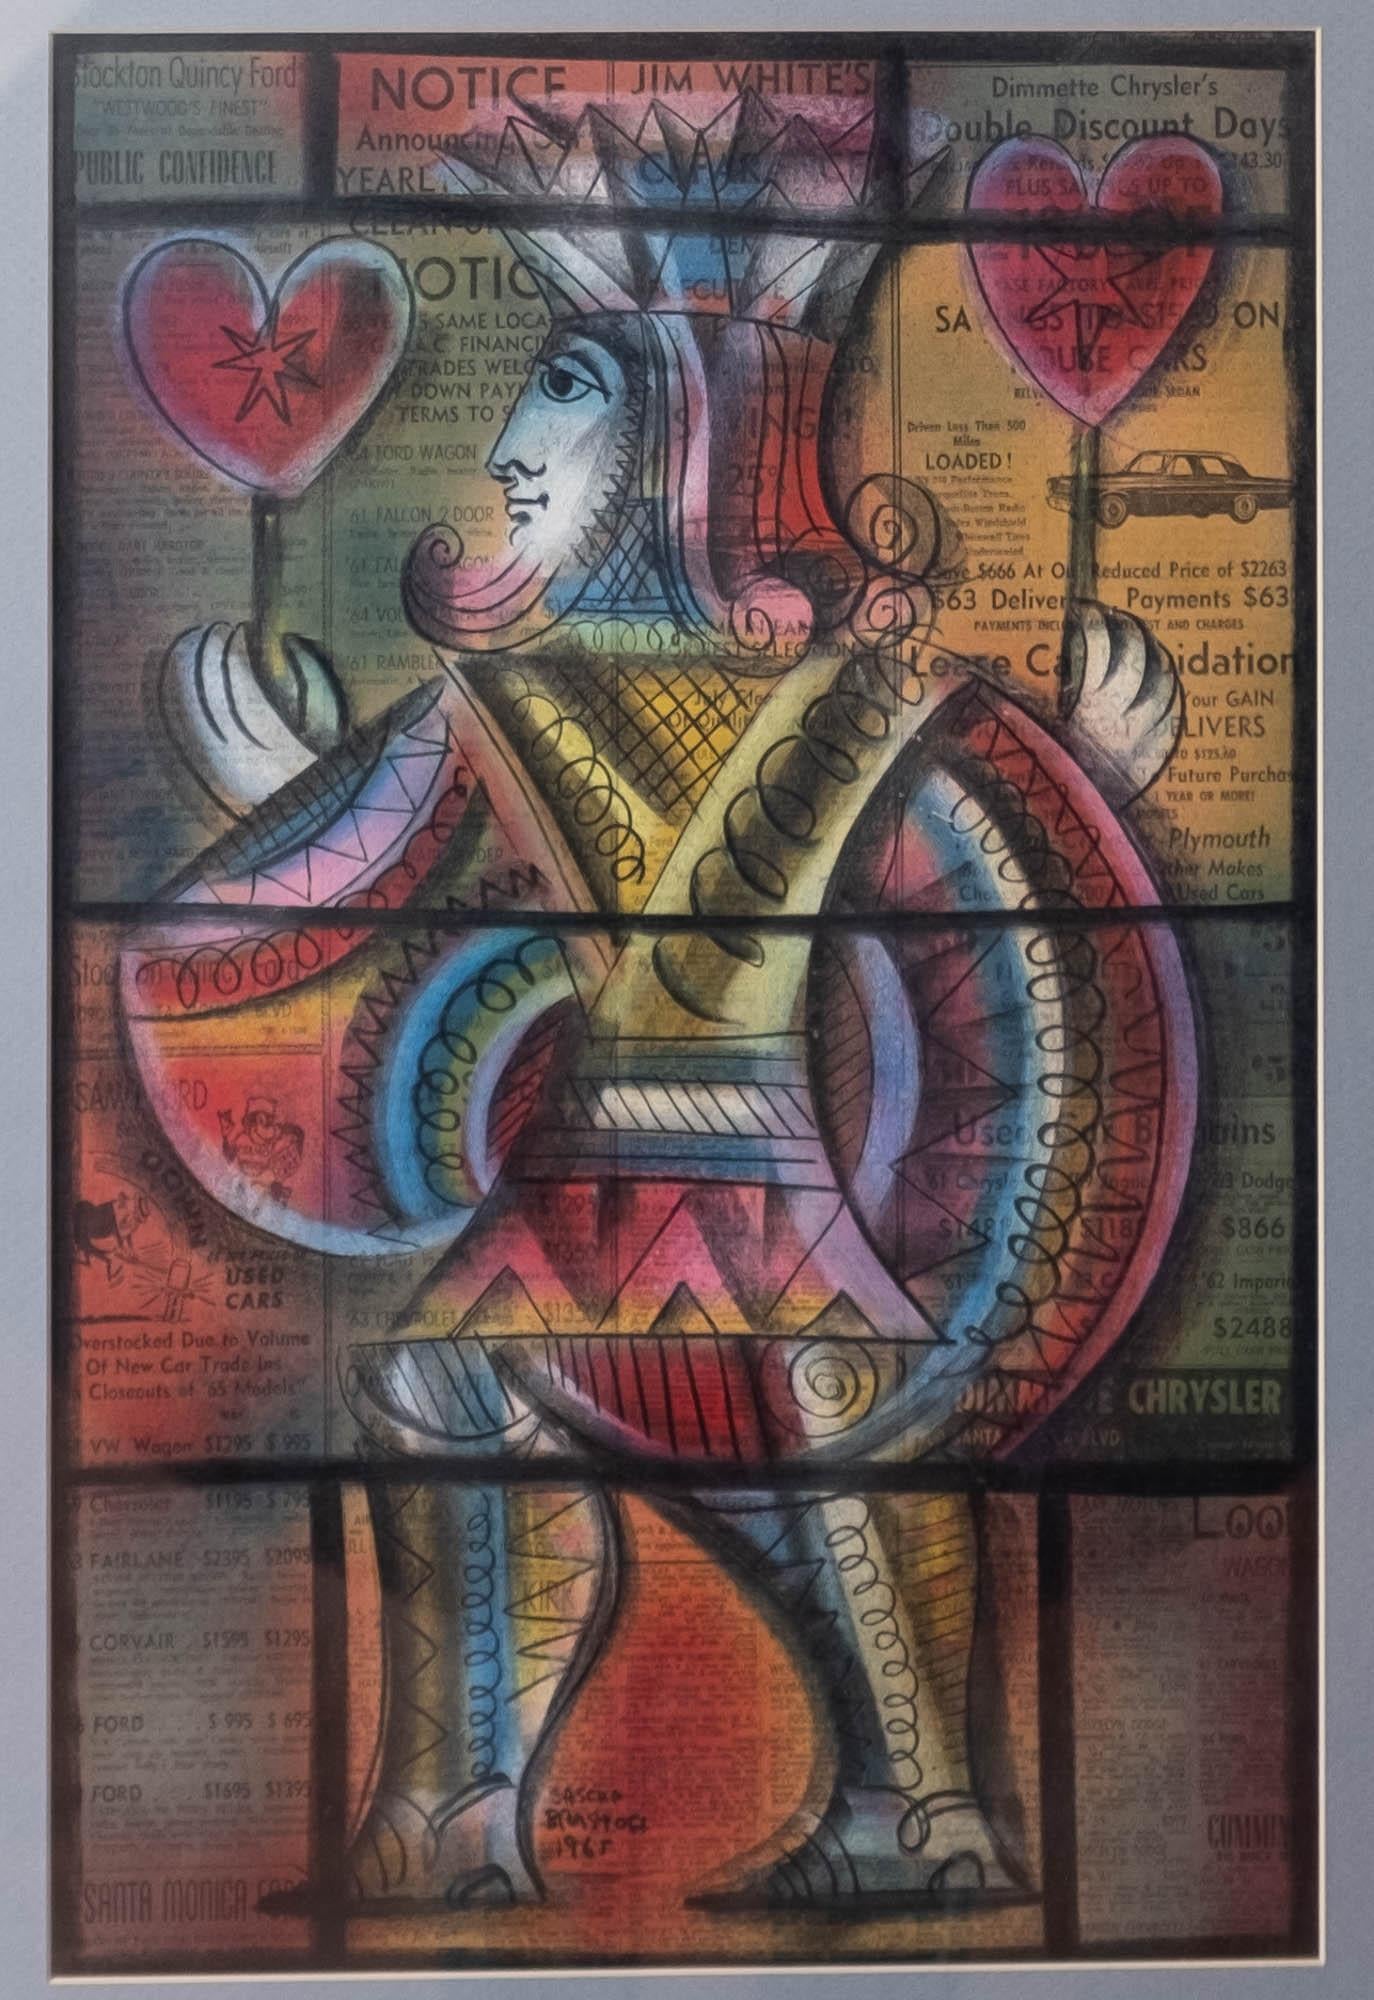 Sascha Brastoff original King of Hearts drawing. Charcoal on period newspaper. Signed and dated 1965. Great original matching hand carved wood frame with a hearts theme.